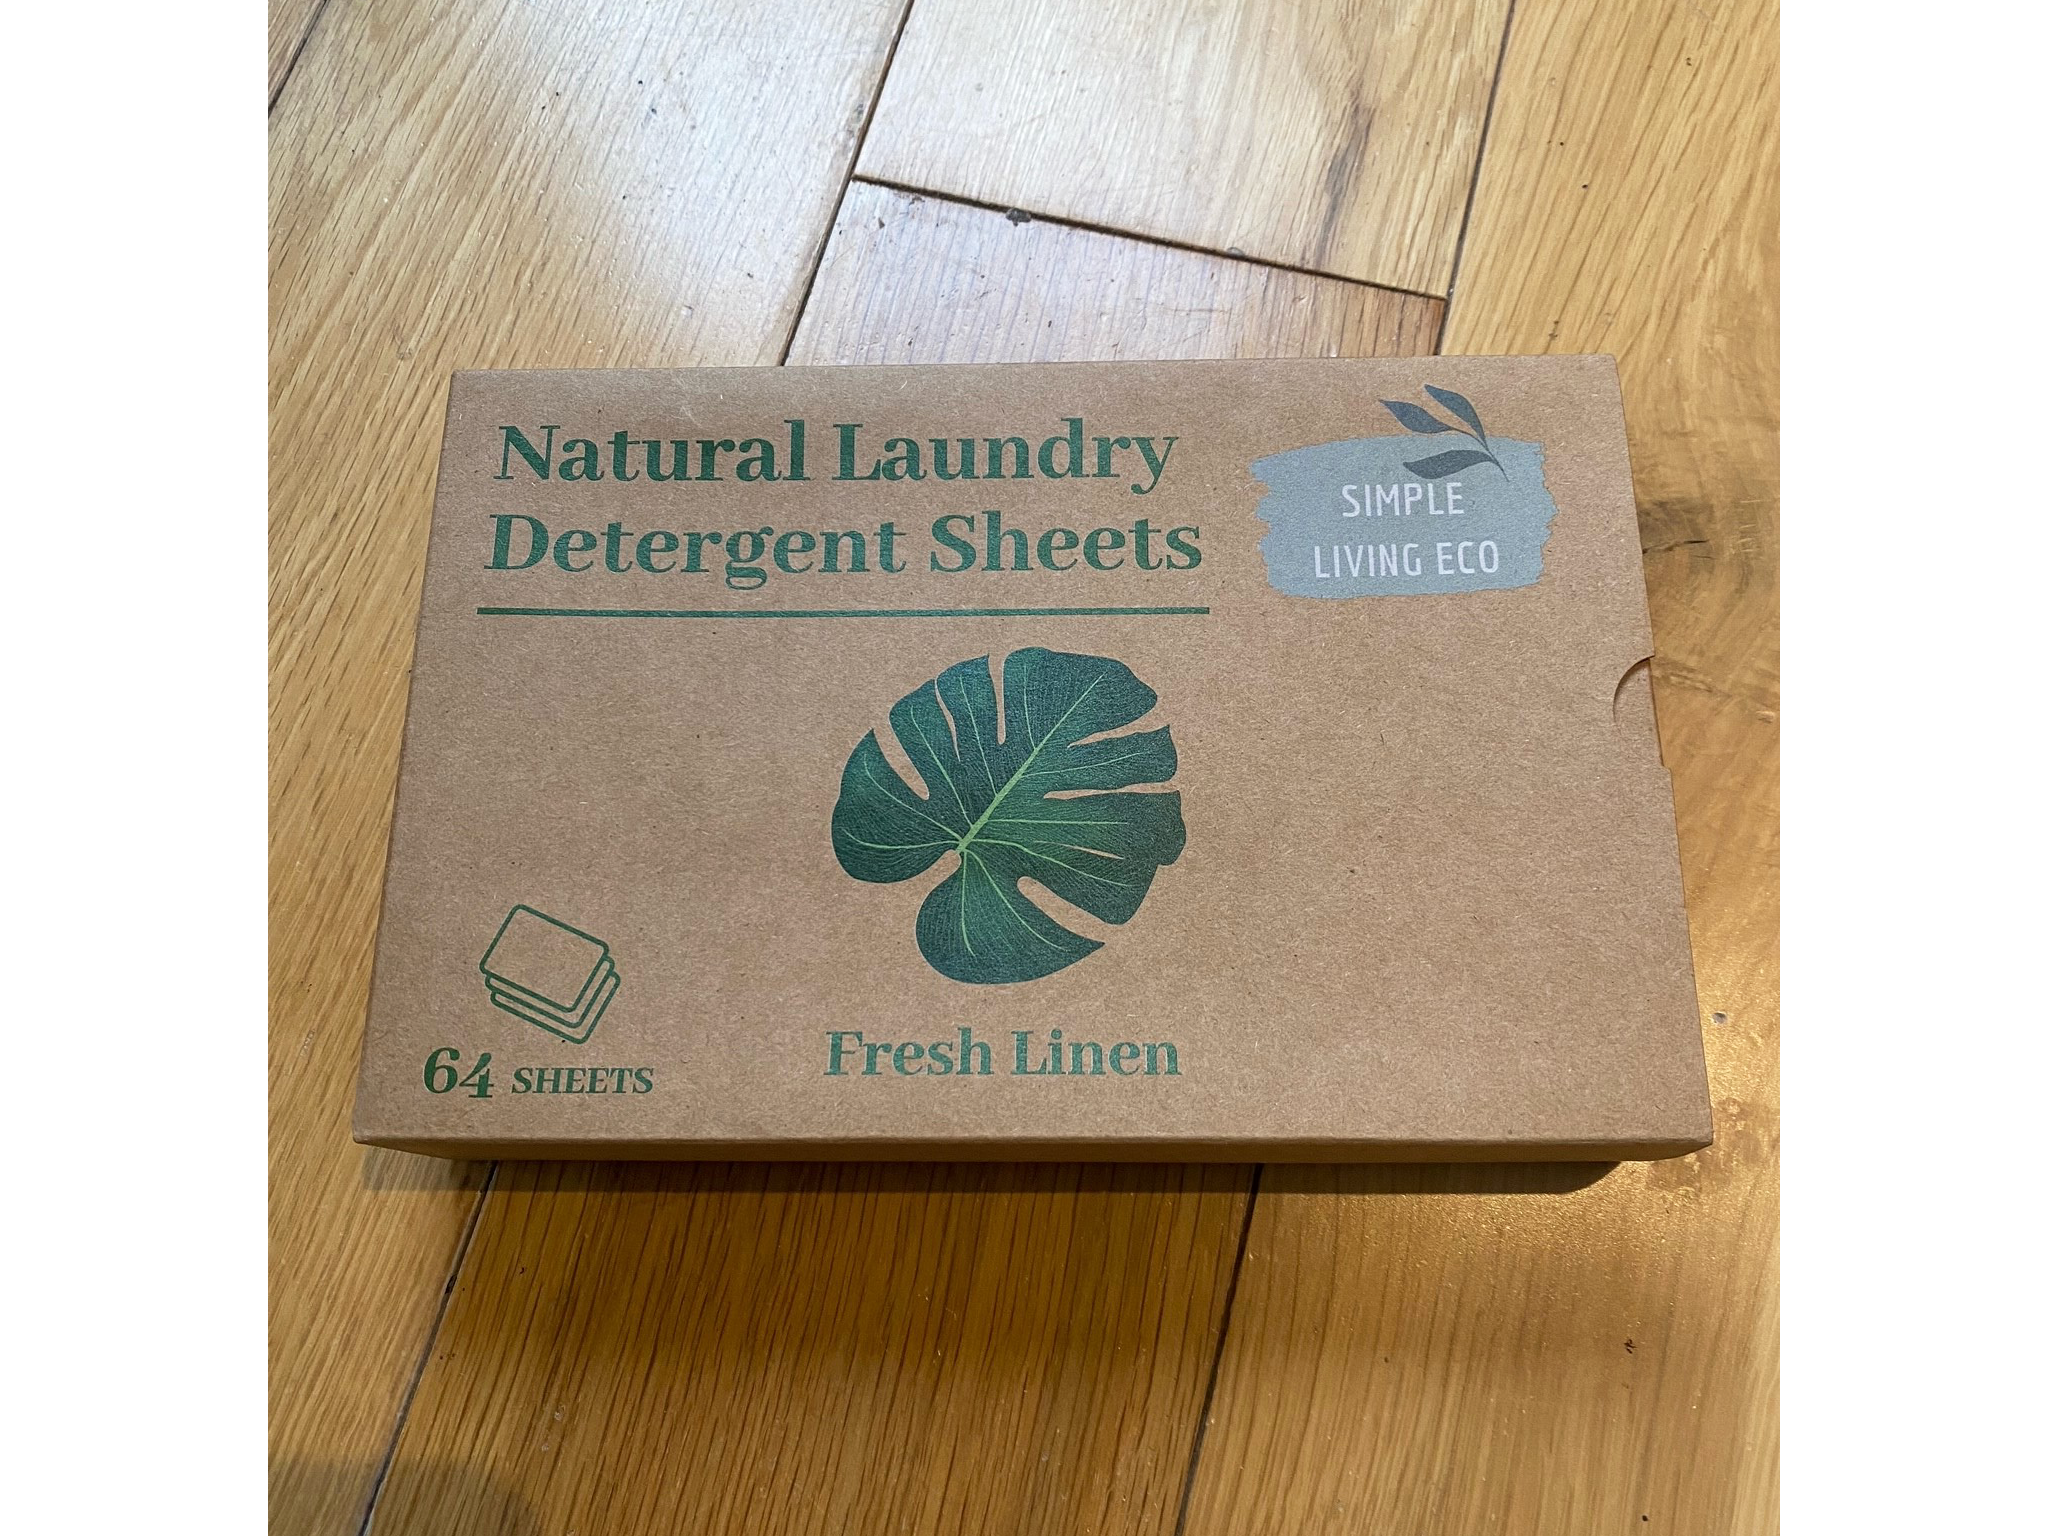 Simple Living Eco spring fresh laundry detergent sheets